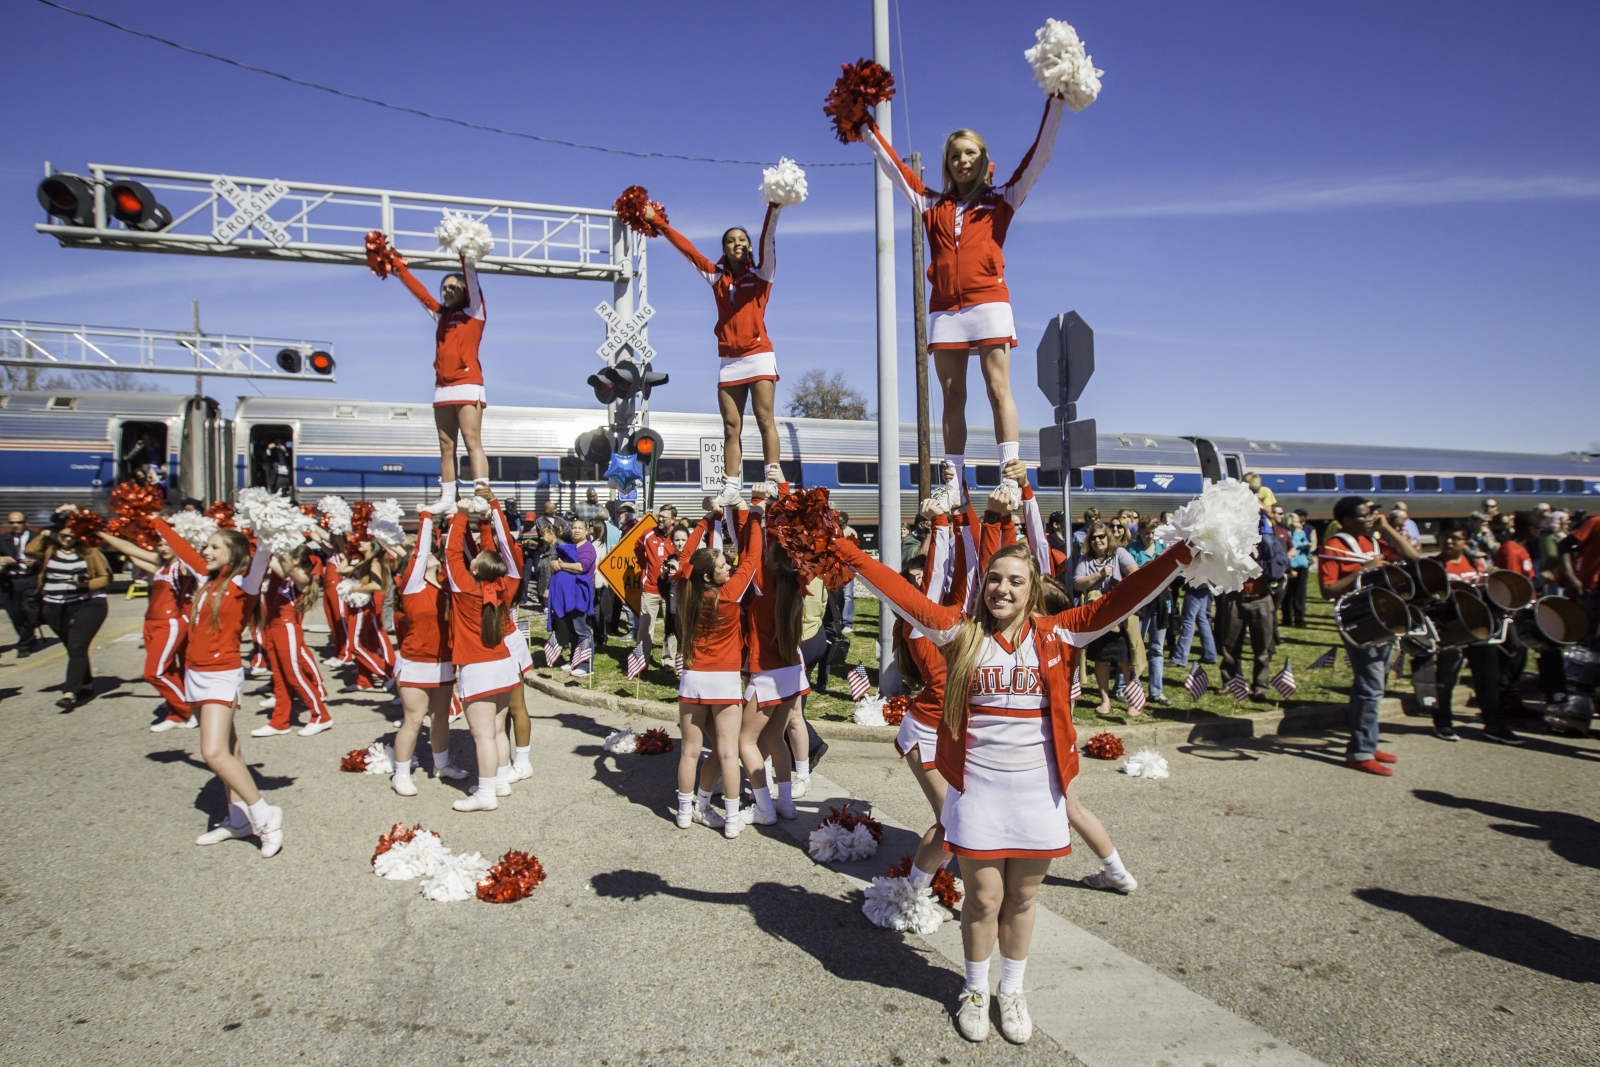 Cheerleaders in red celebrate in front of an Amtrak train at a crowded station event.